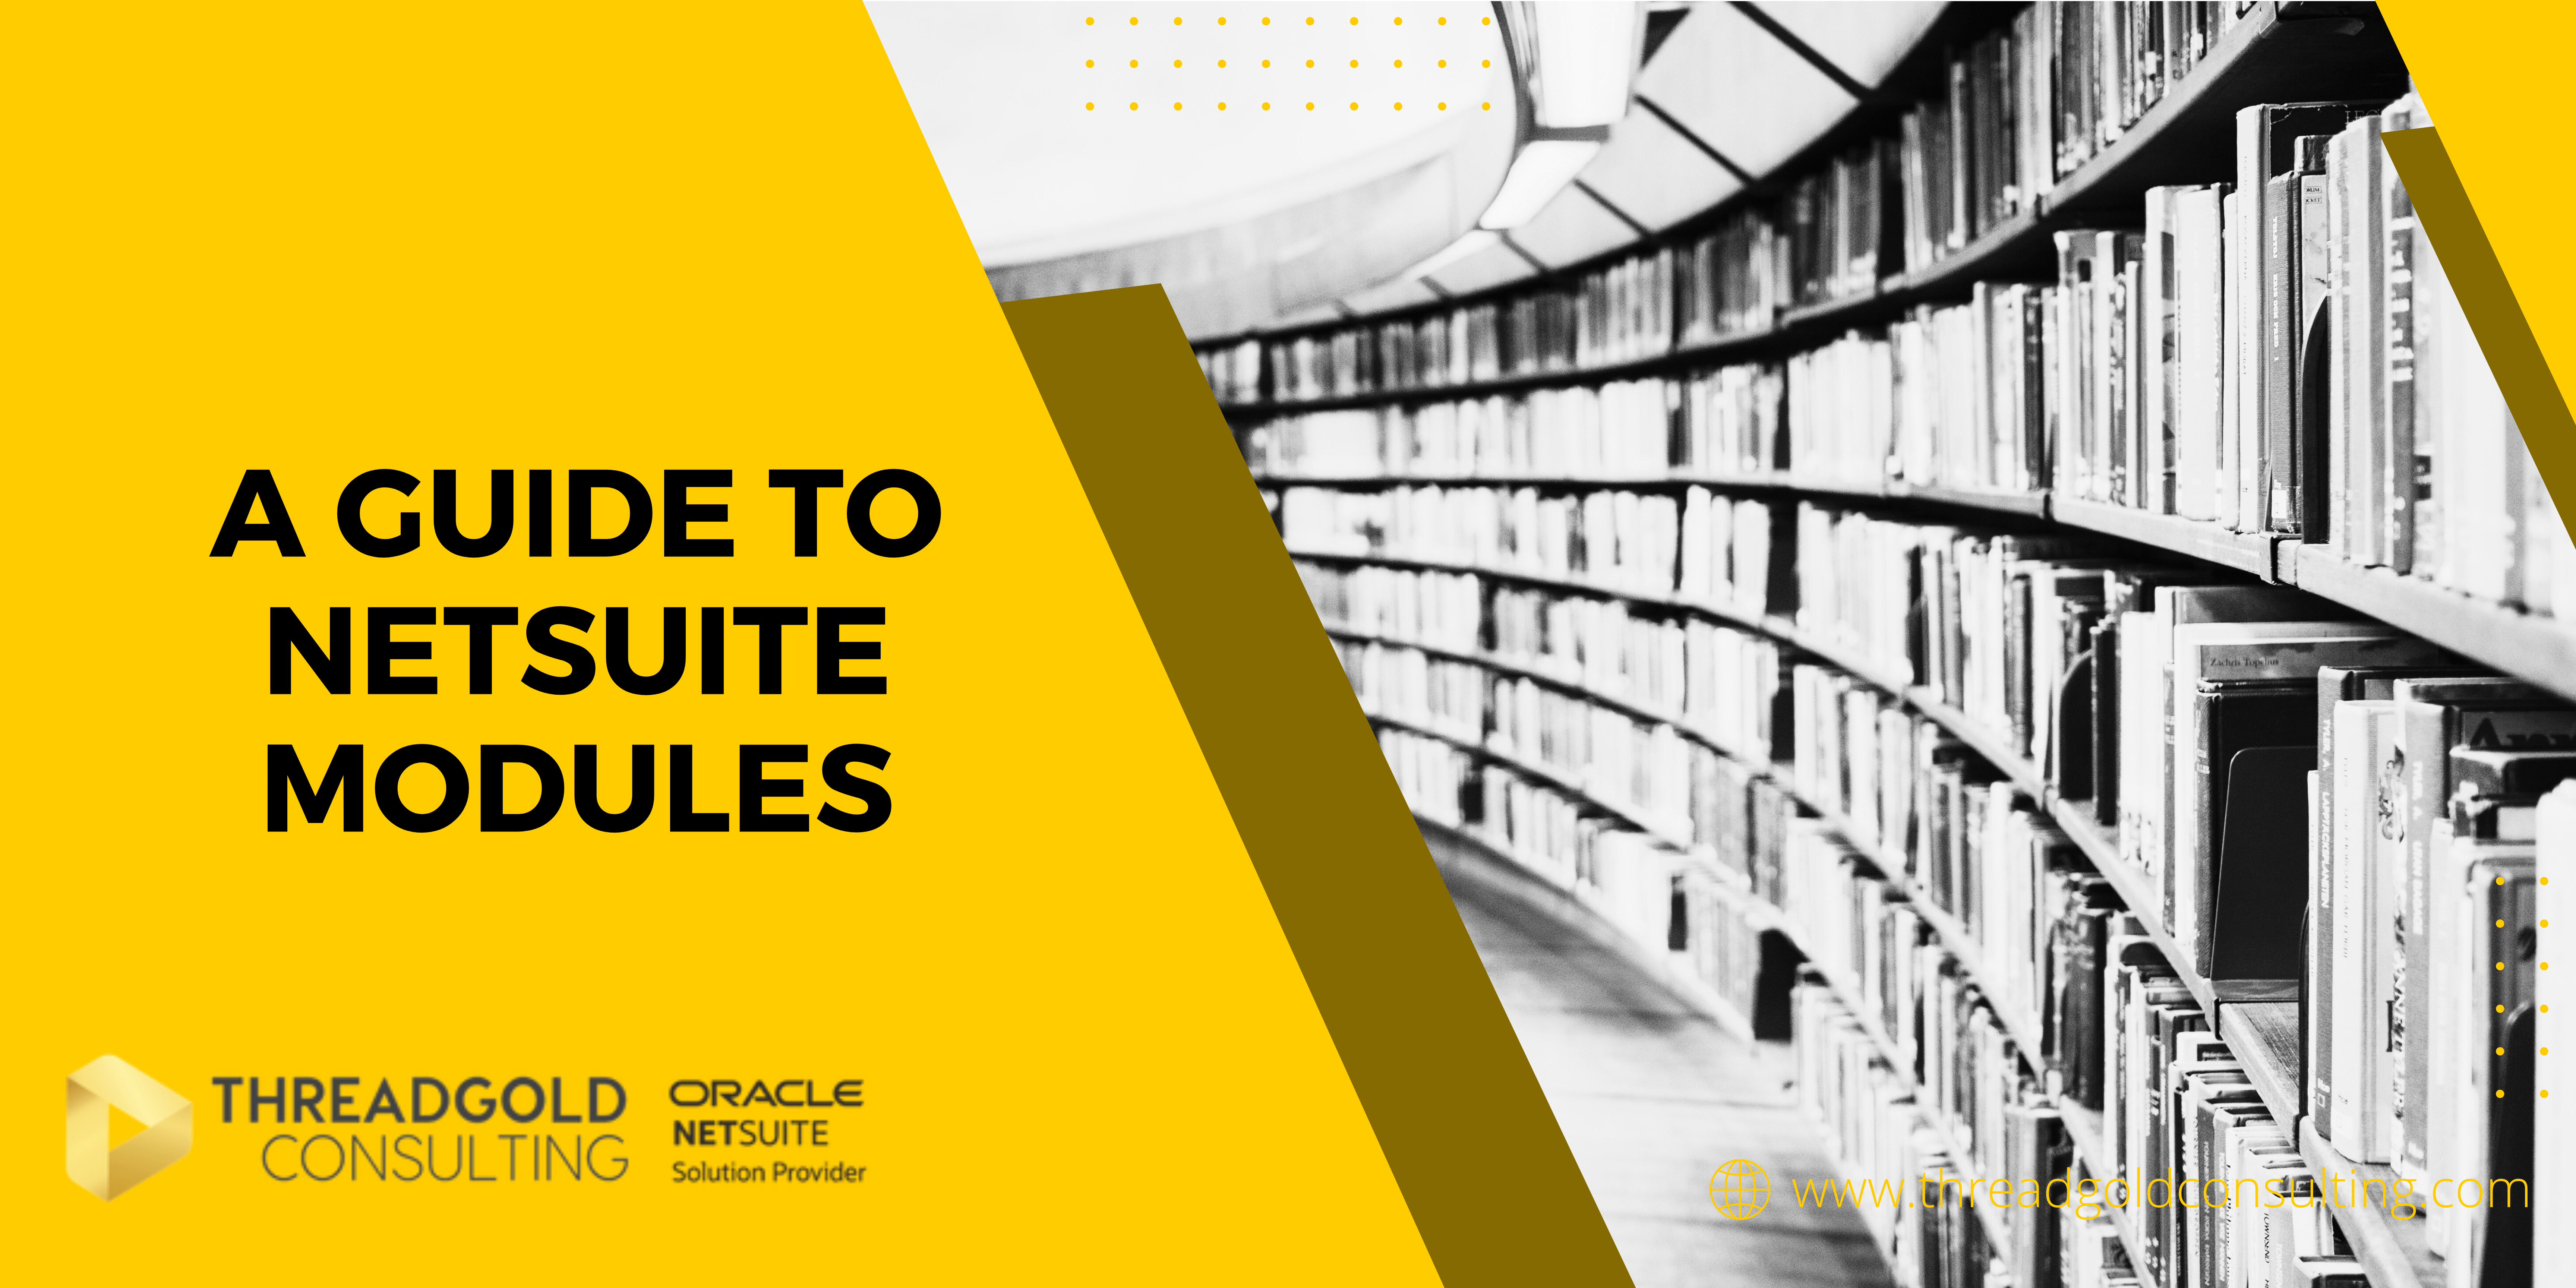 A Guide to NetSuite Modules